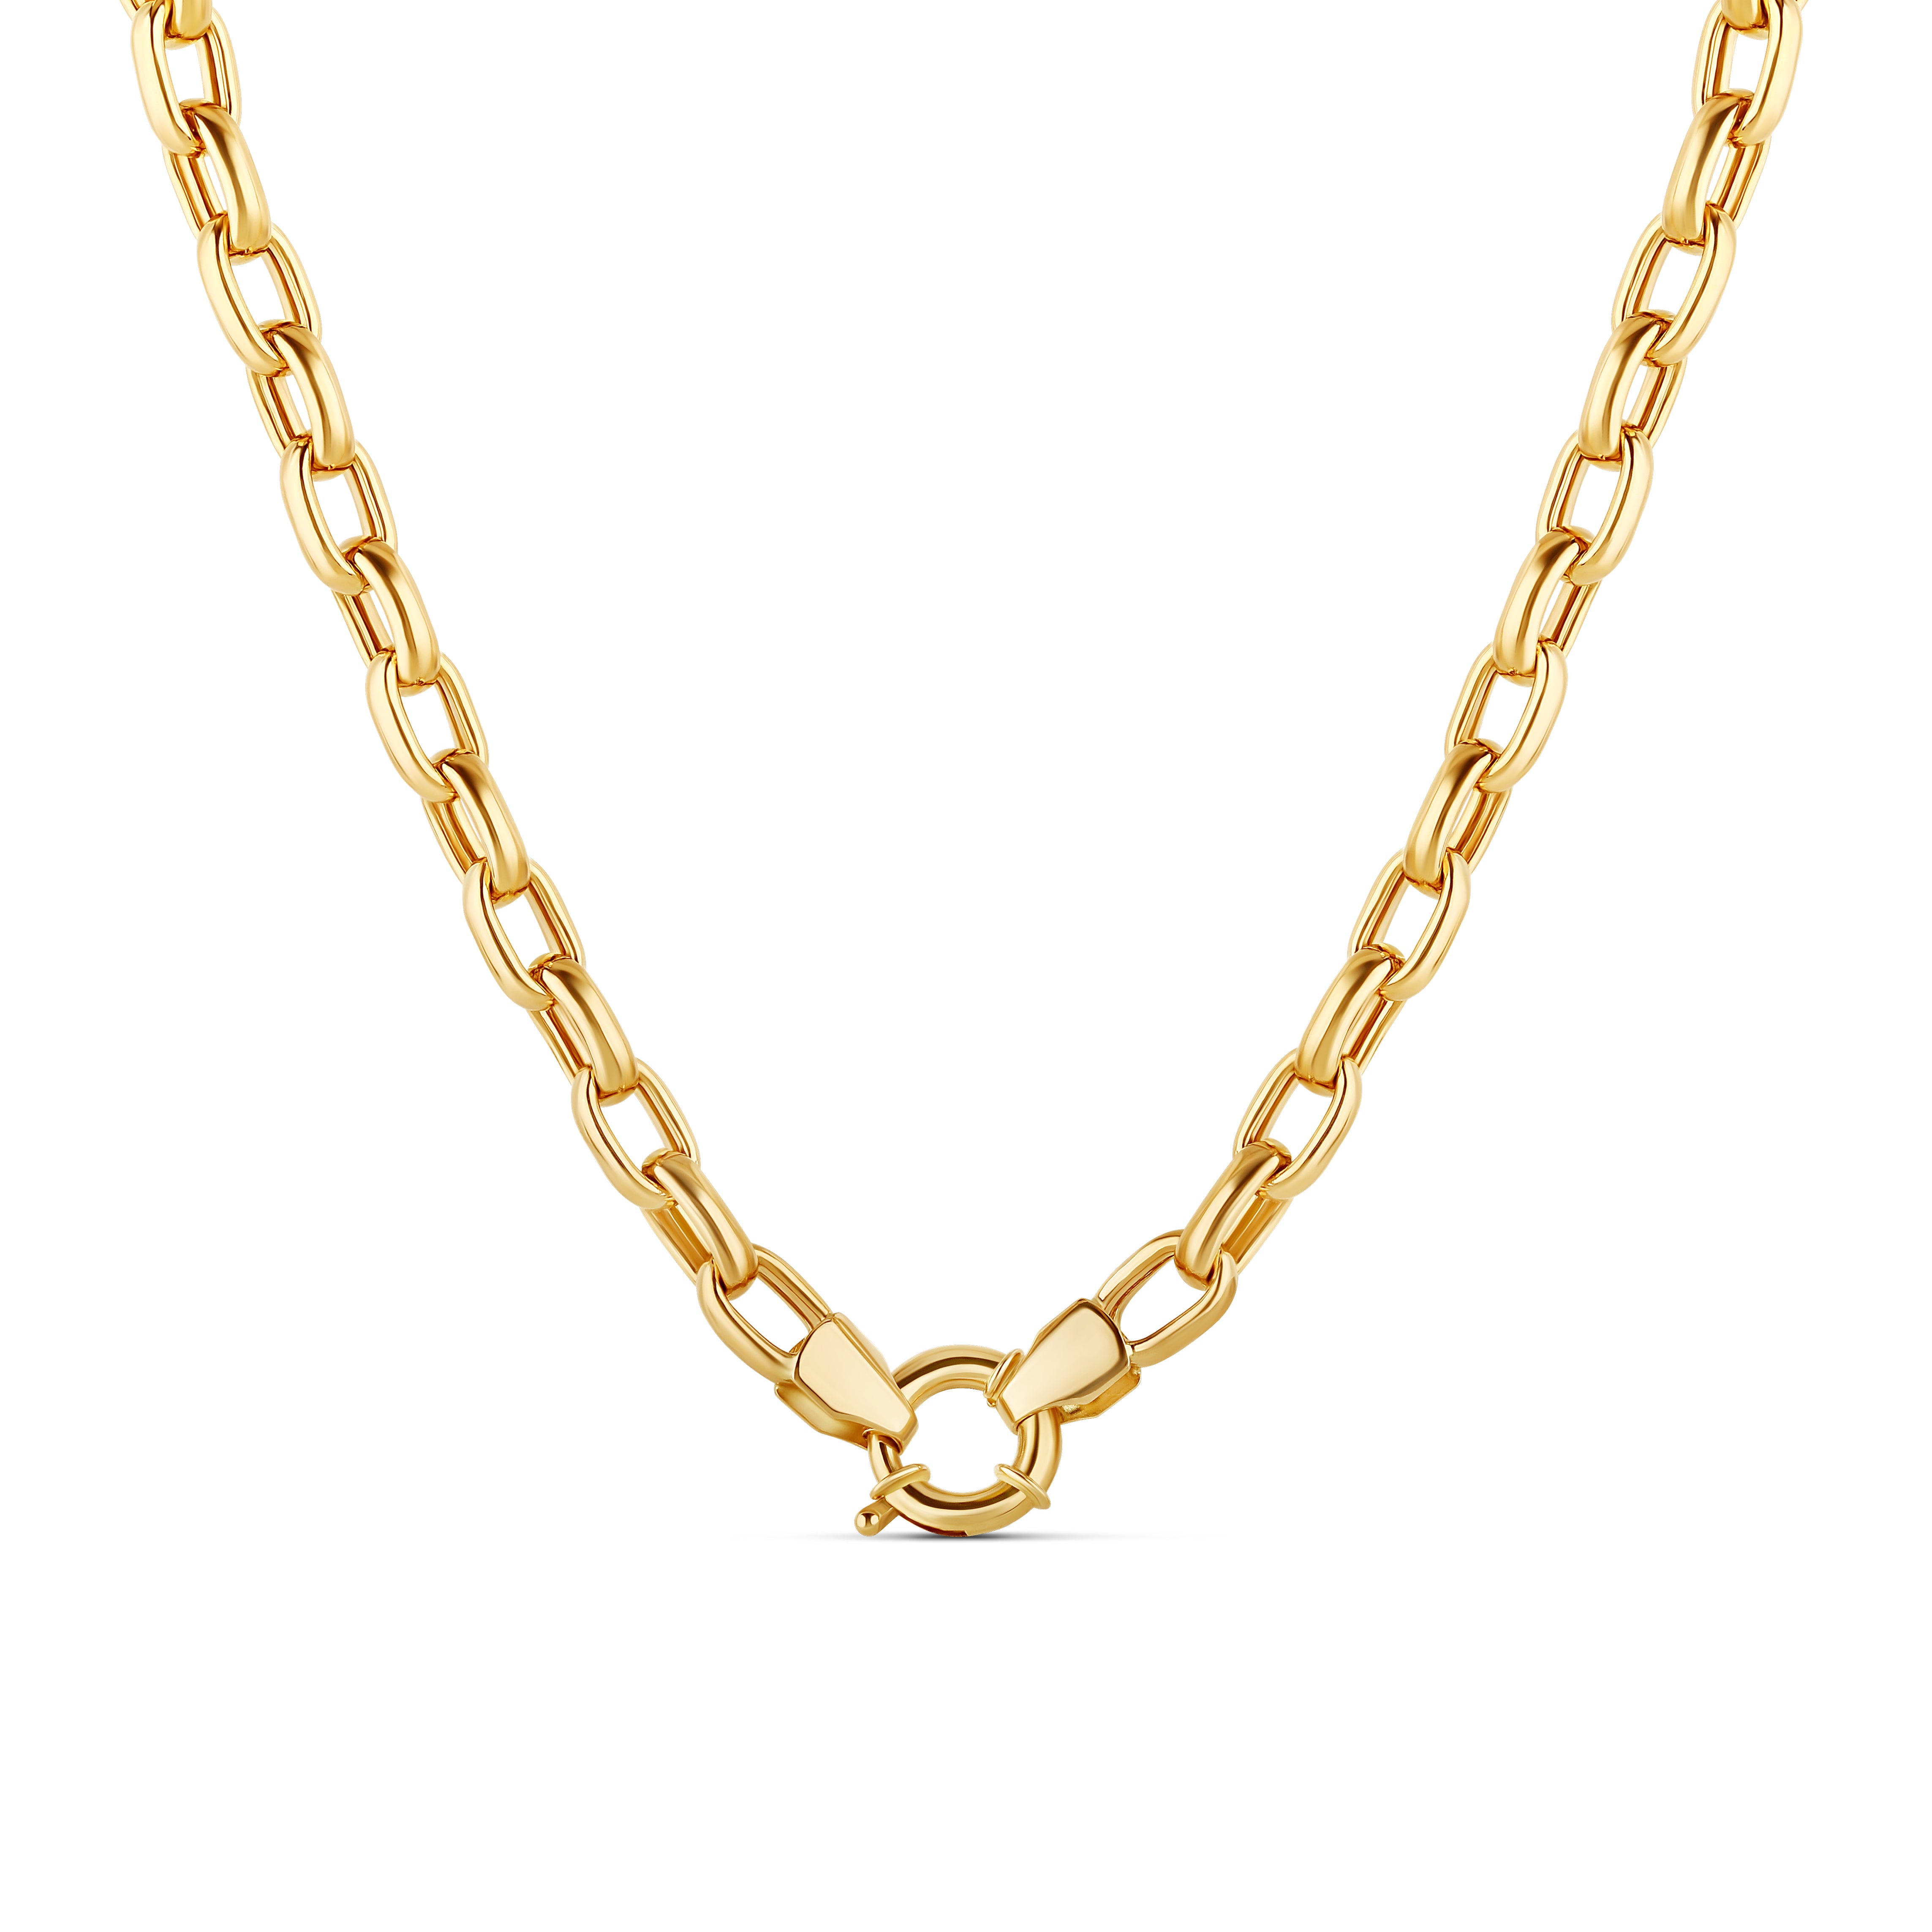 Round Link Chain Necklace with clasp